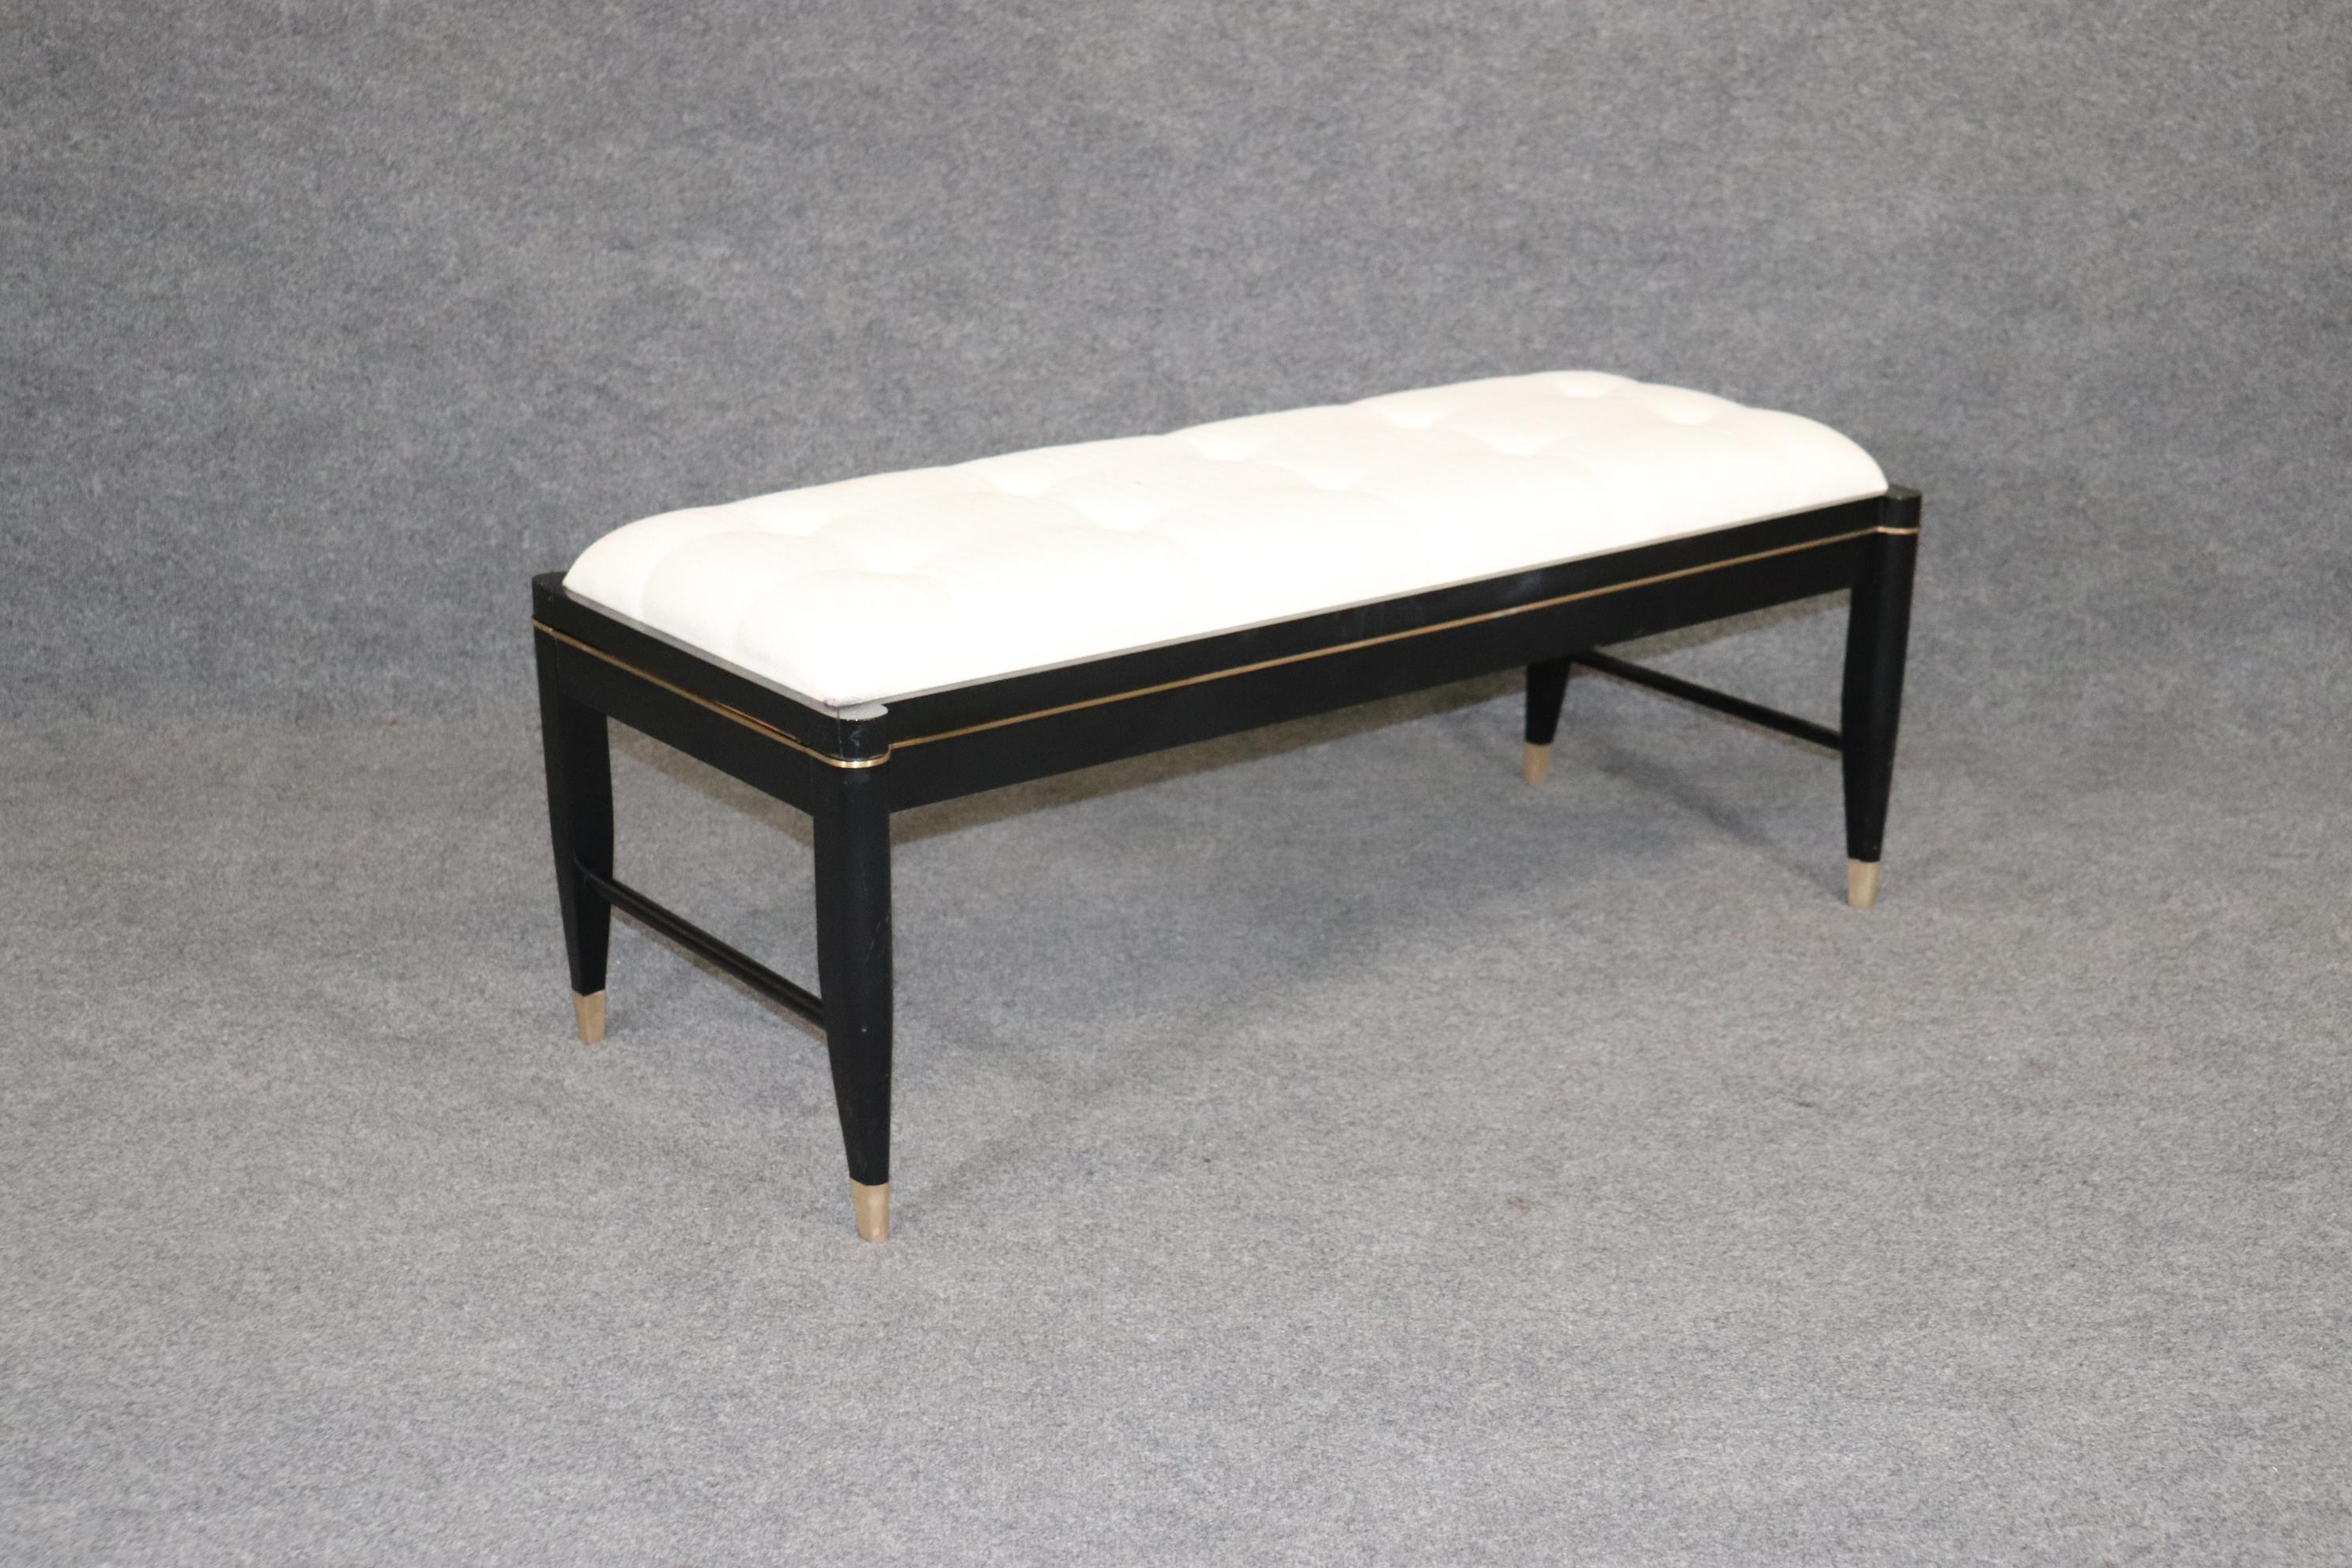 Late 20th Century Ebonized Tufted Tommi Parzinger Style Brass Mounted Window Bench Ottoman